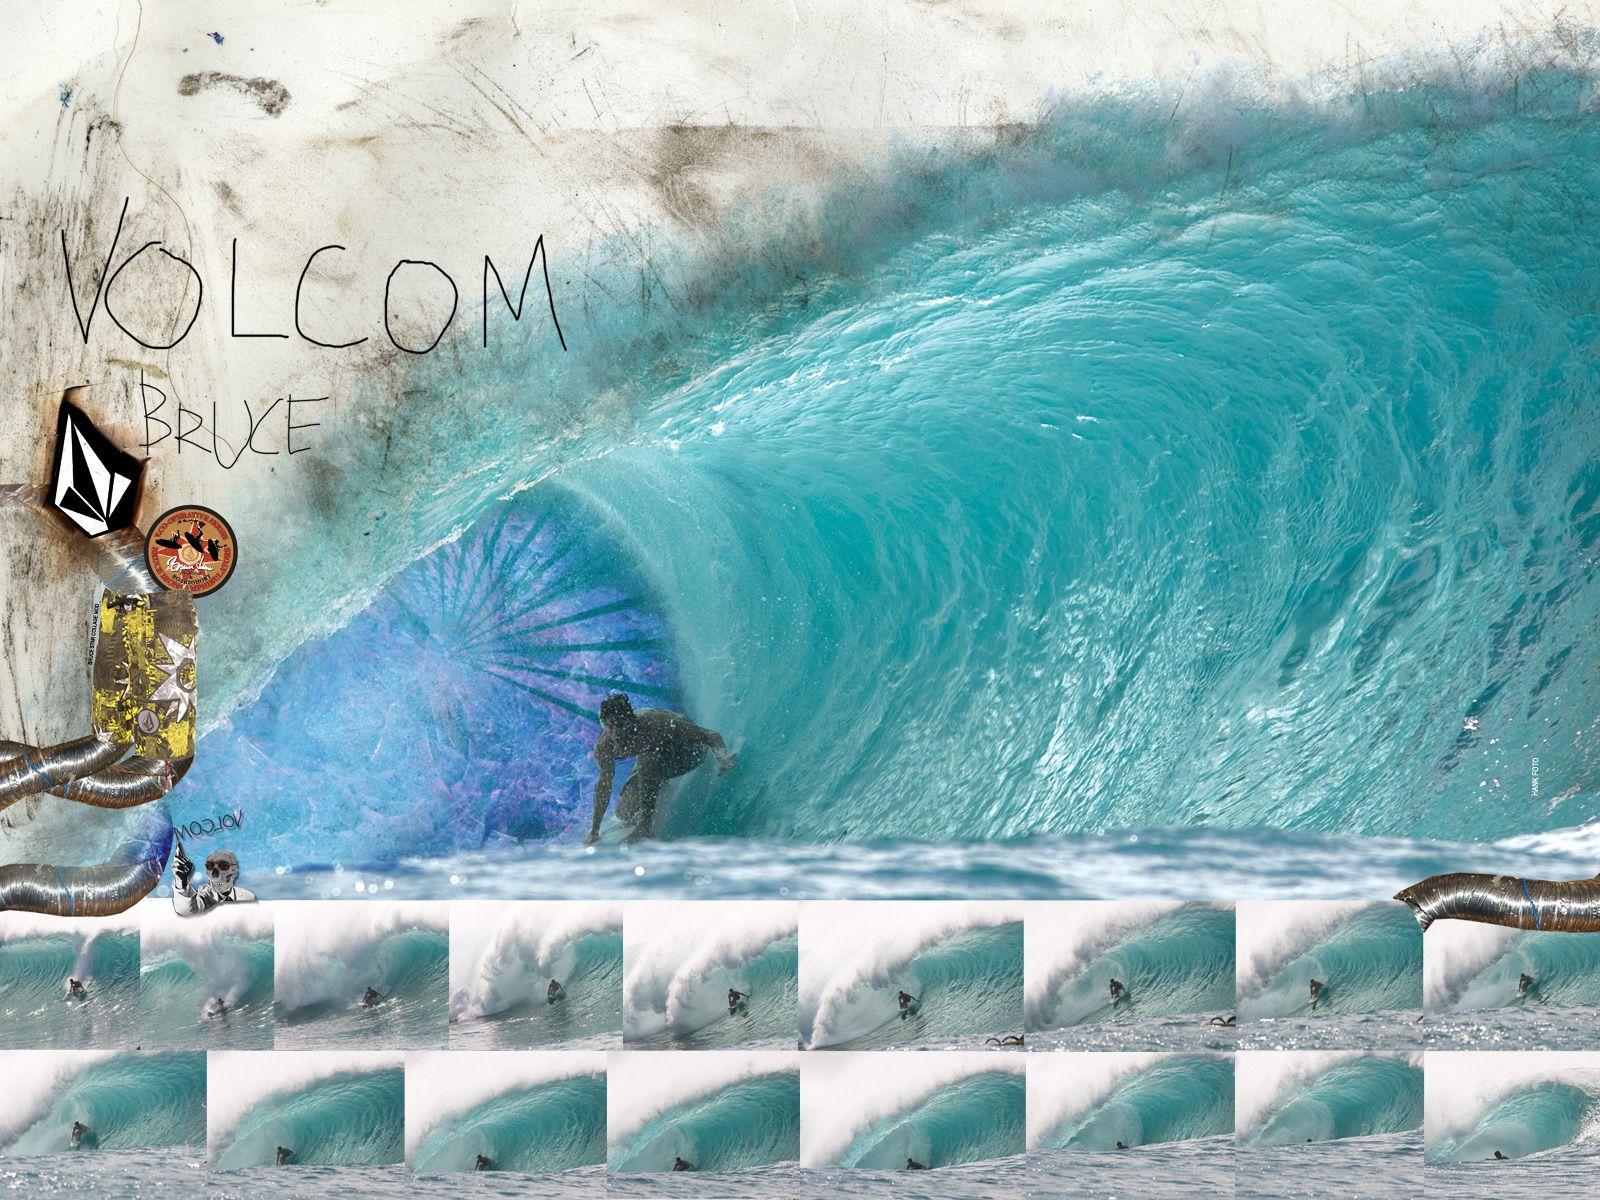 Download the Bruce From Volcom Wallpaper, Bruce From Volcom iPhone